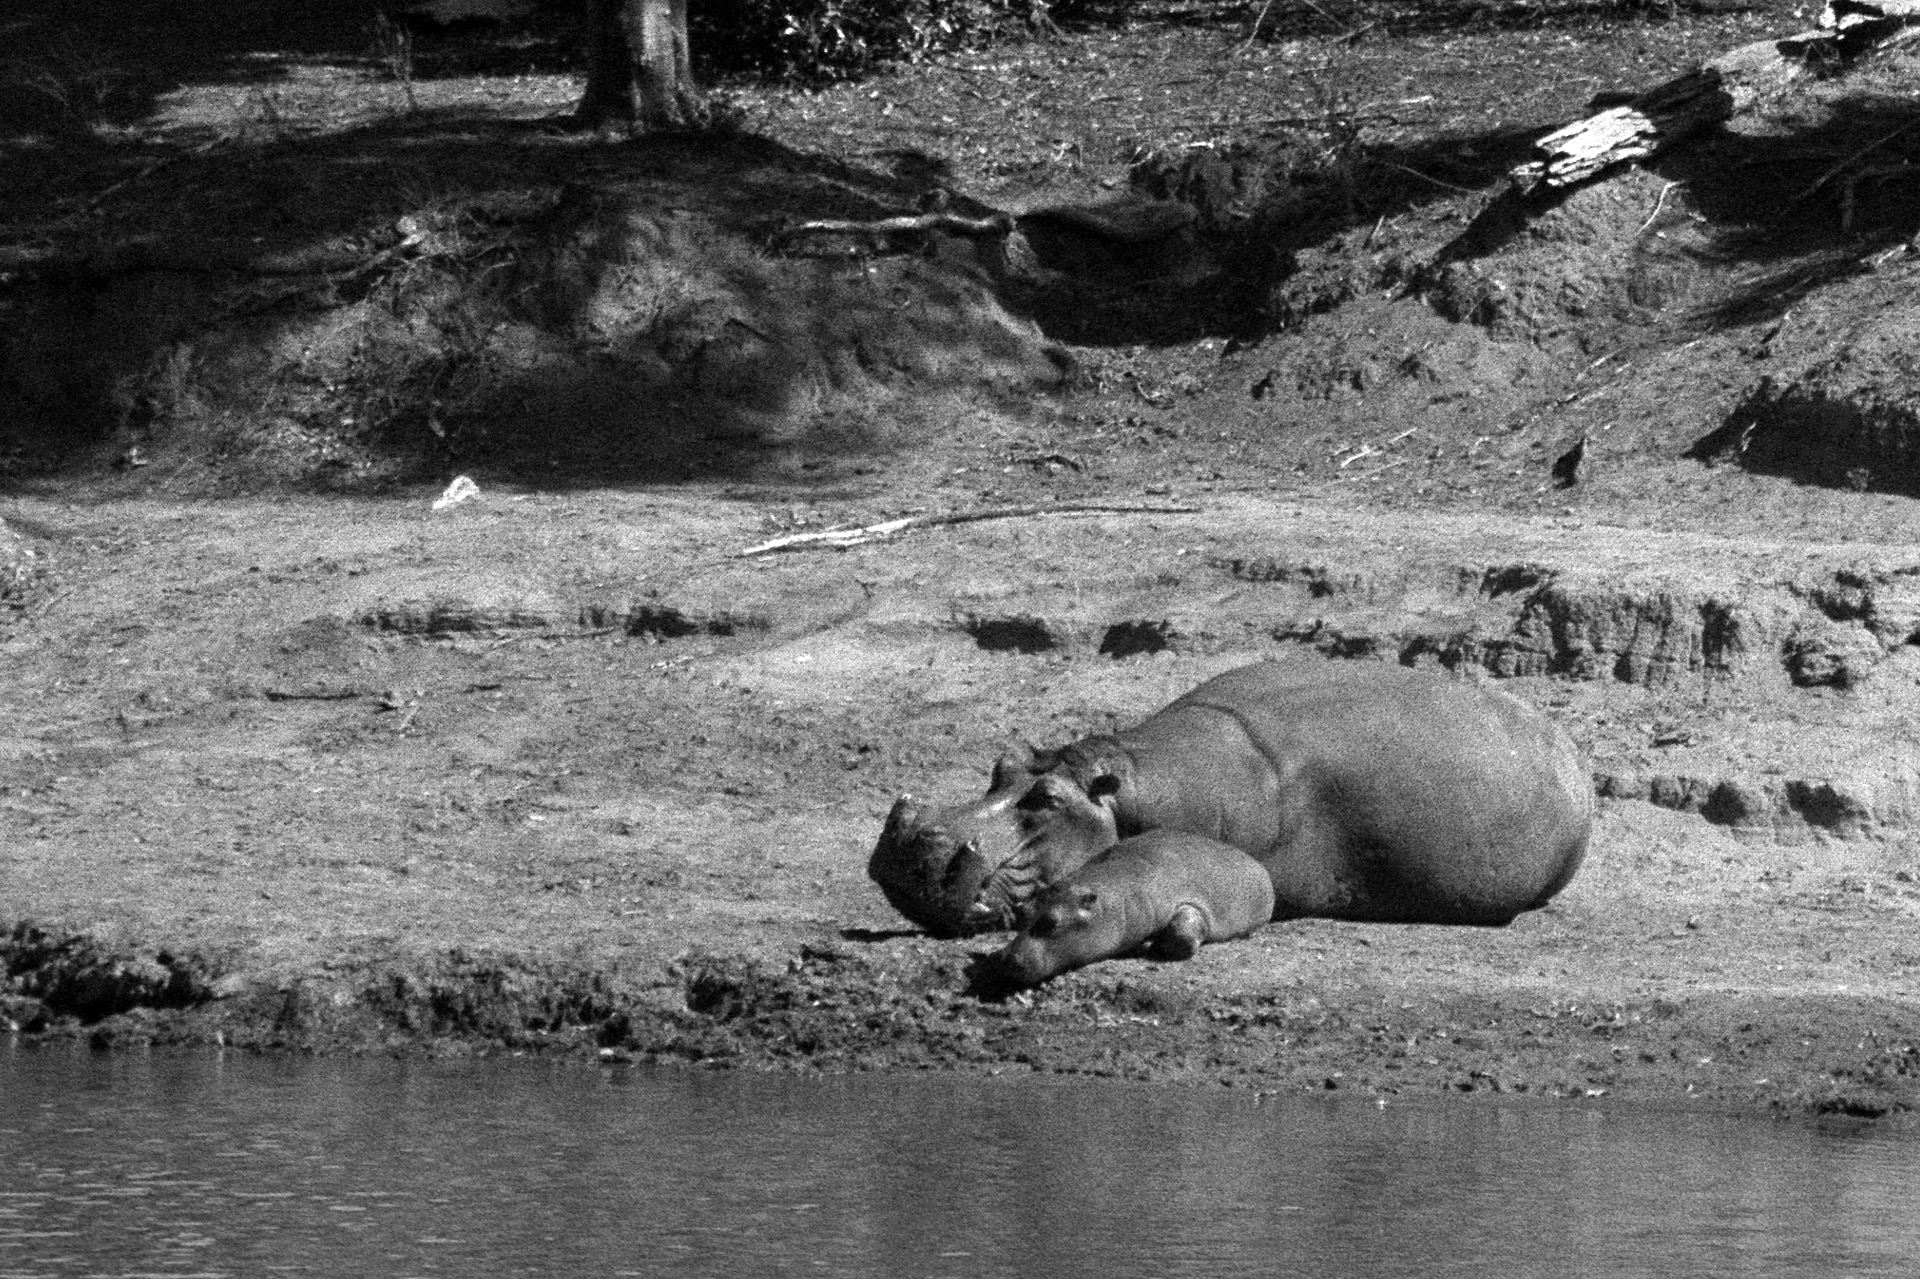 Mama hippo with her calf resting on Mara river, Kenyan side